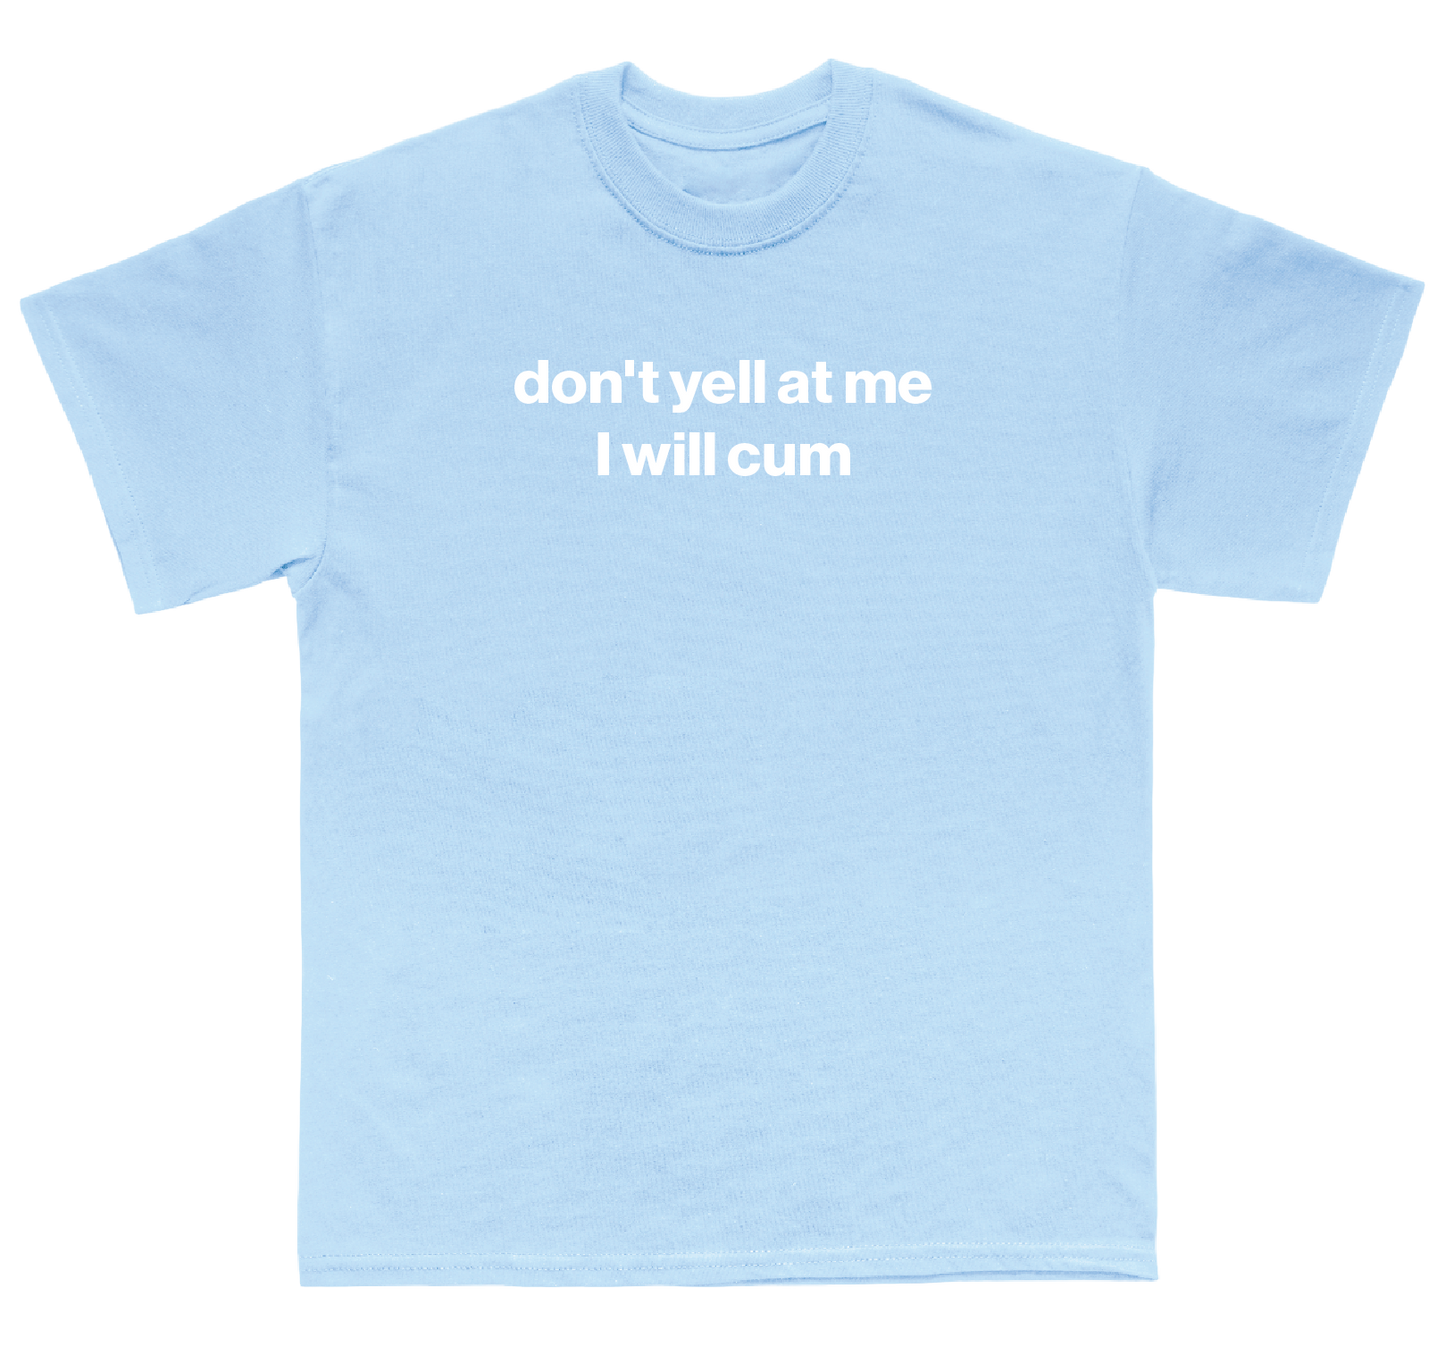 don't yell at me I will cum shirt